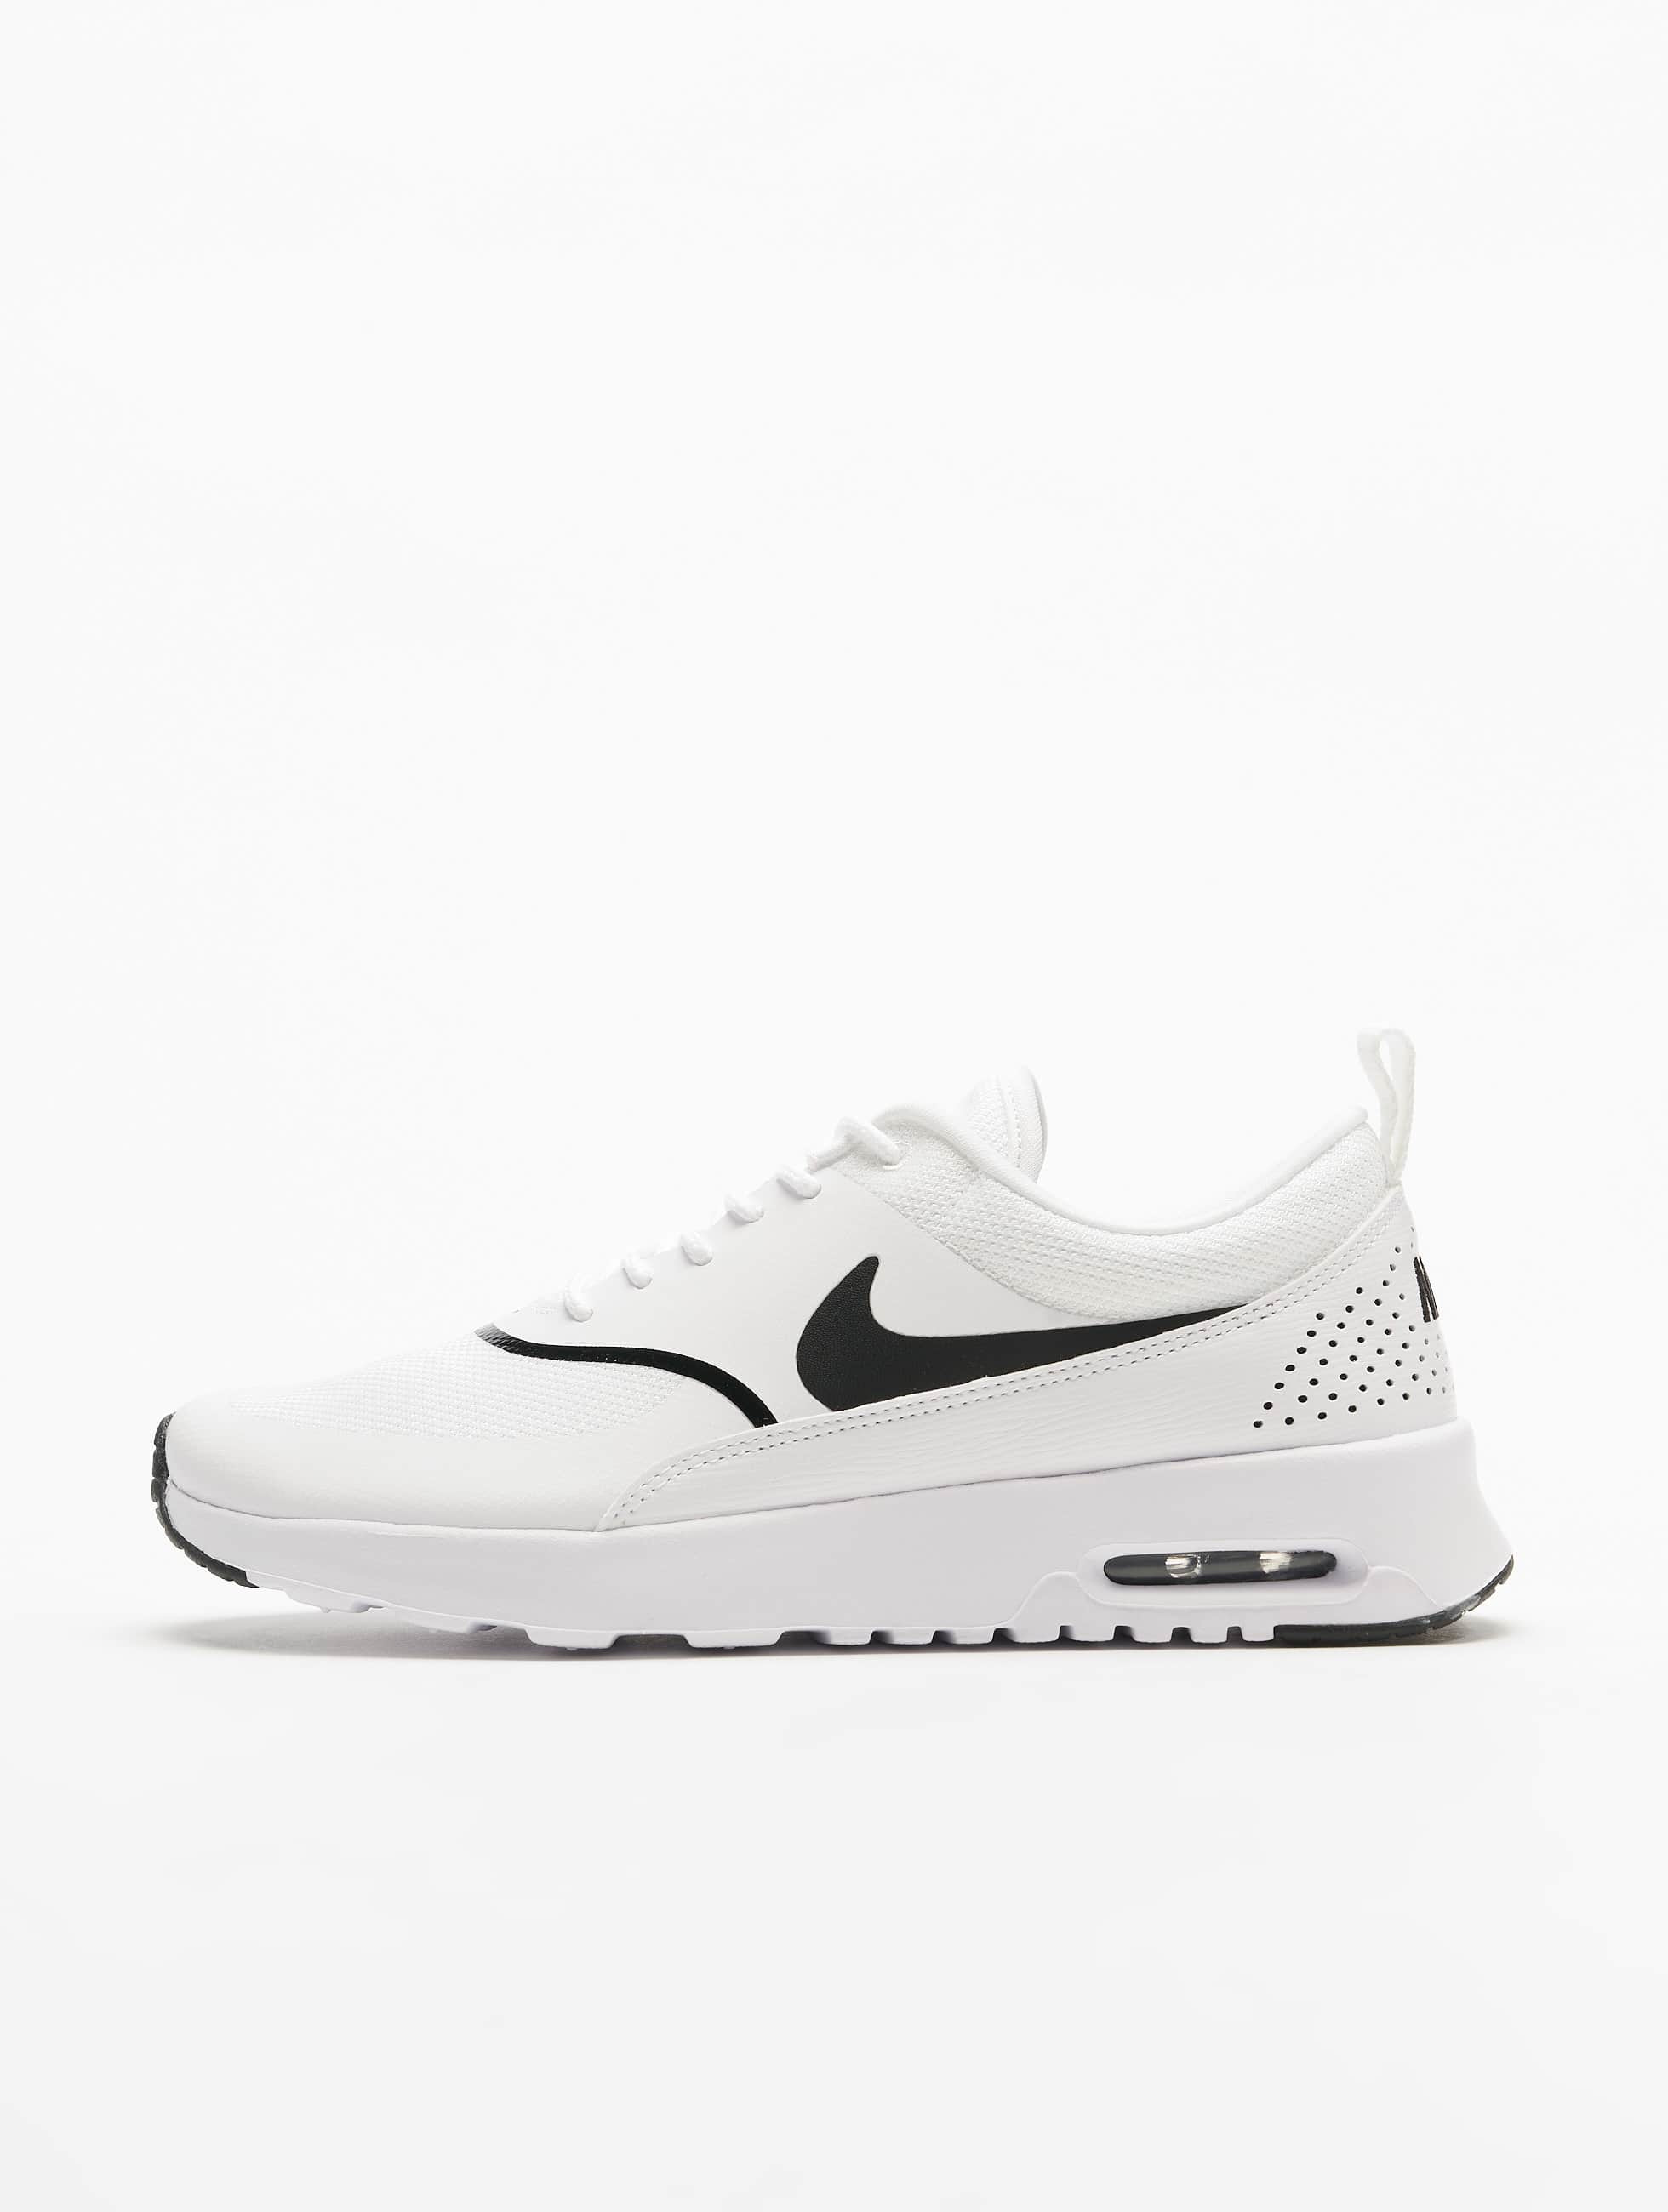 air max 96 femme taille 41